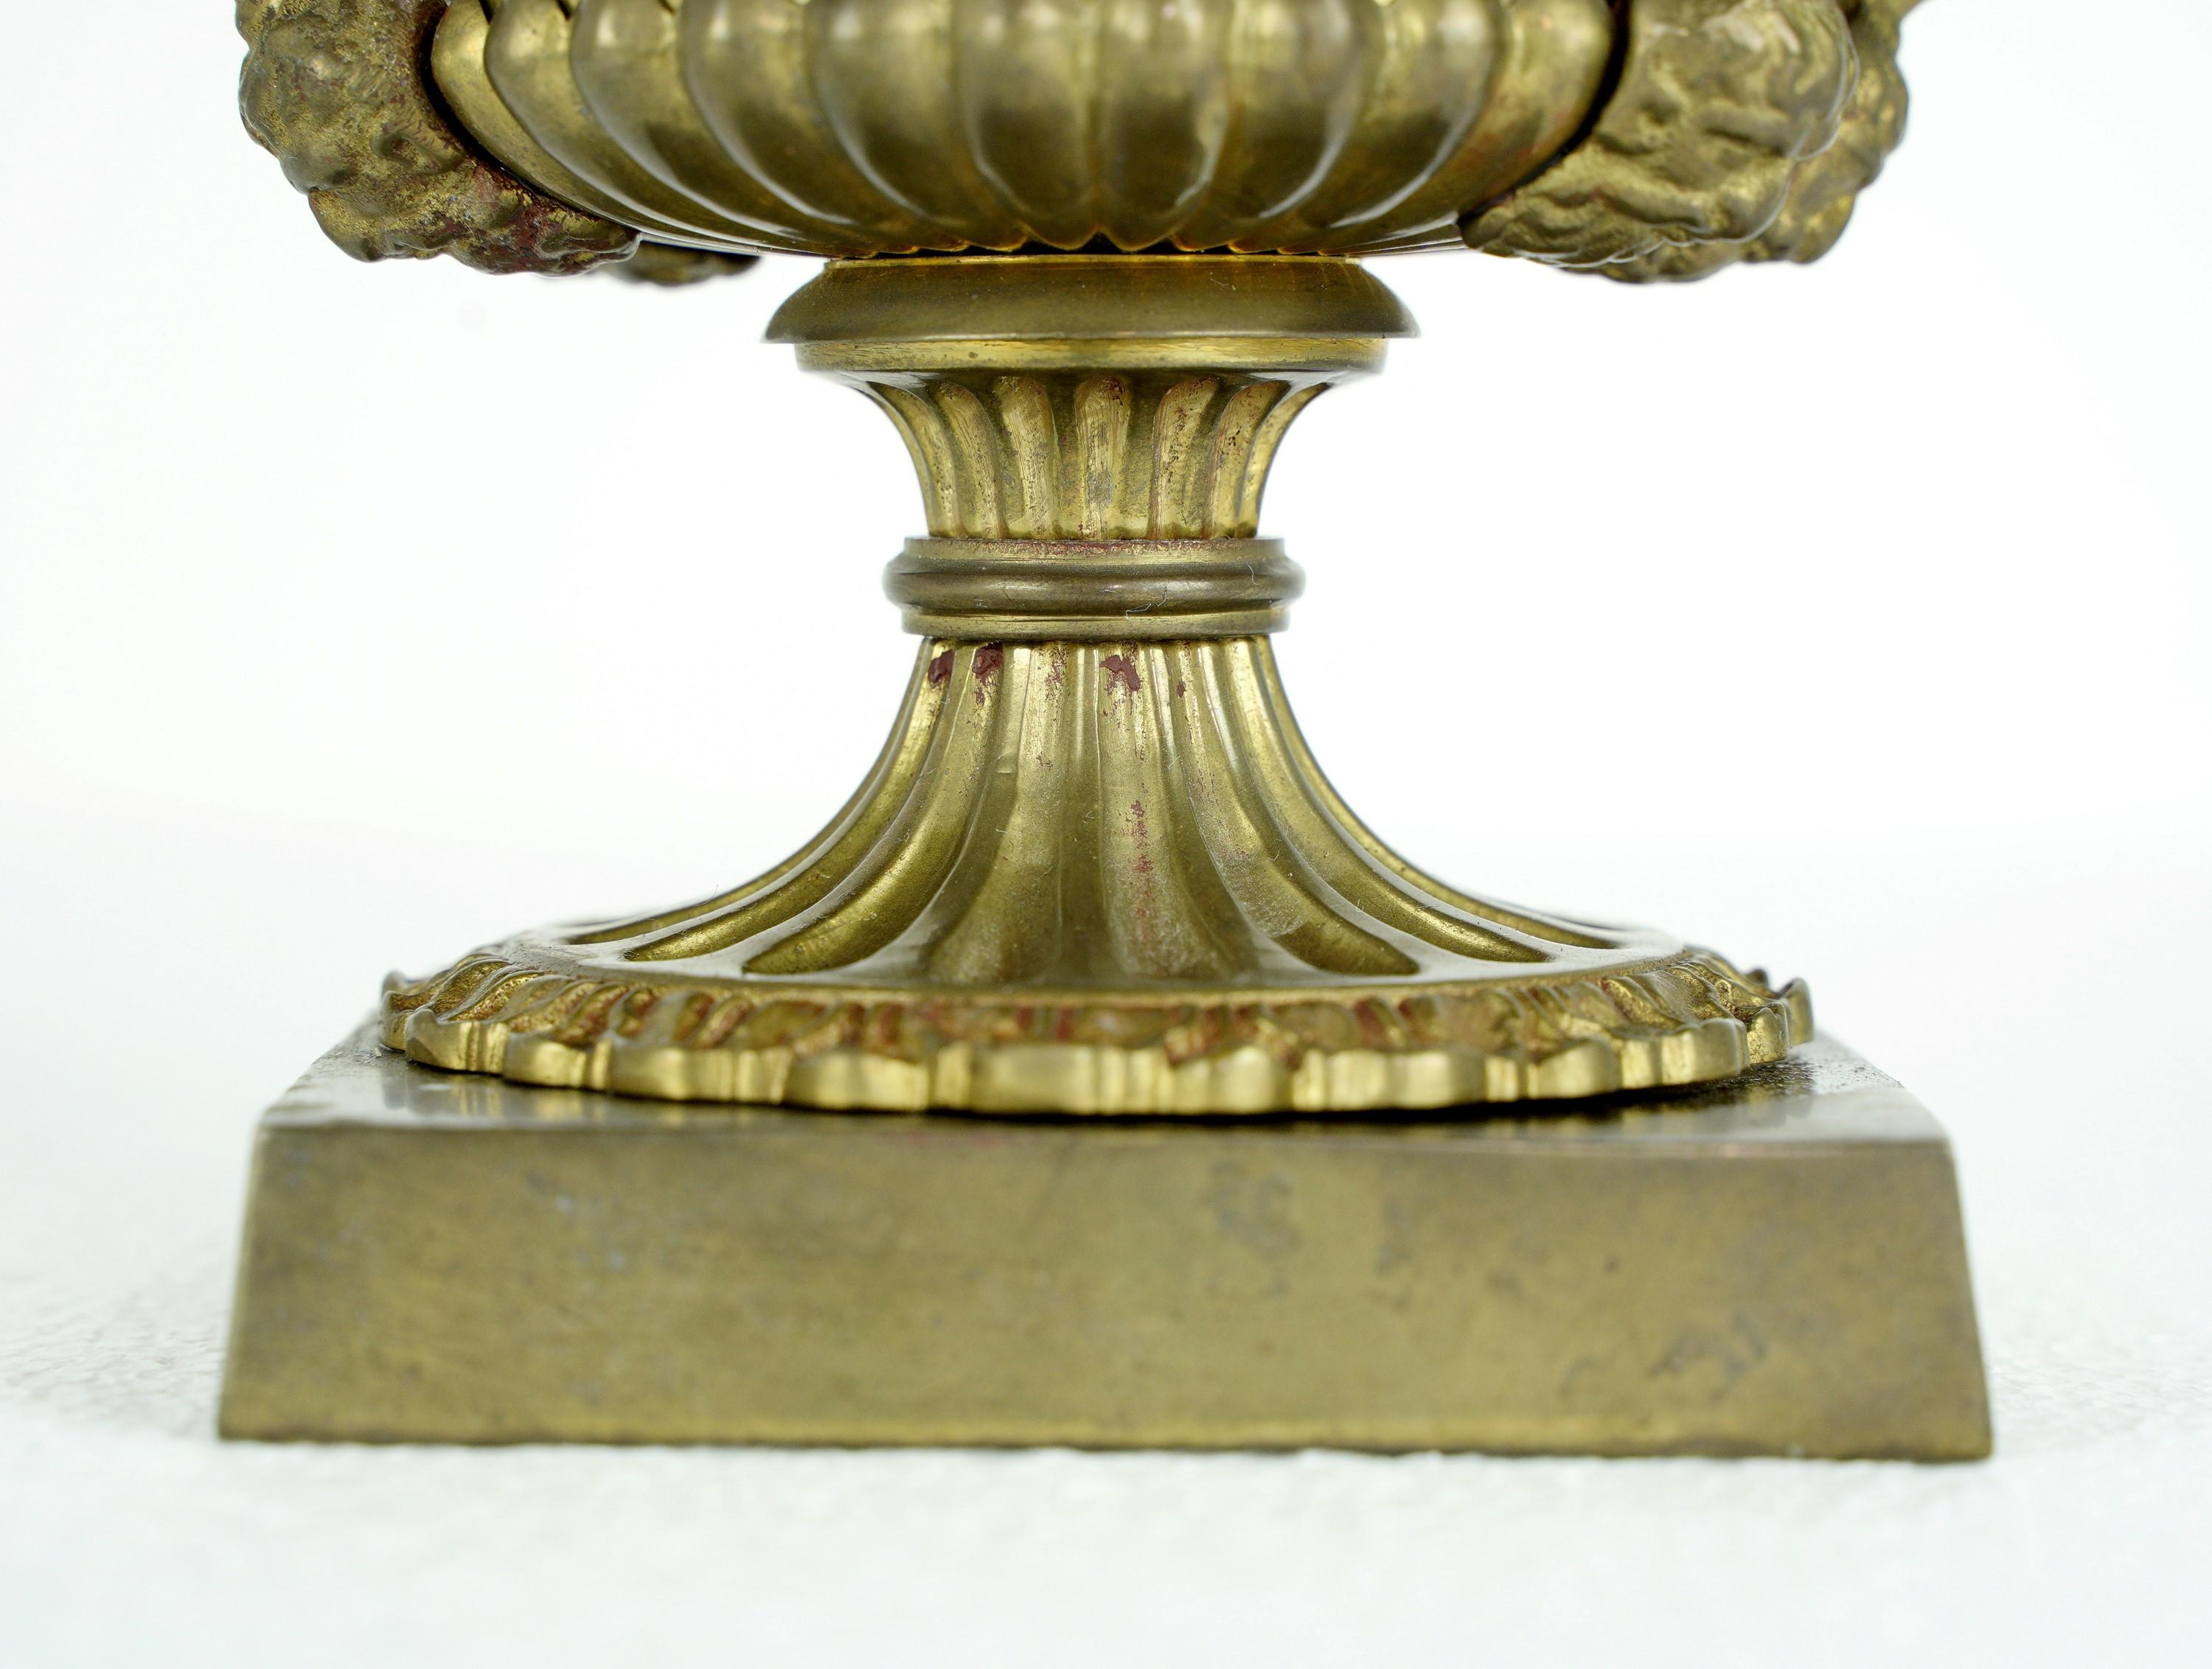 Contemporary Pair of Solid Brass Candle Holders by Mottahedeh